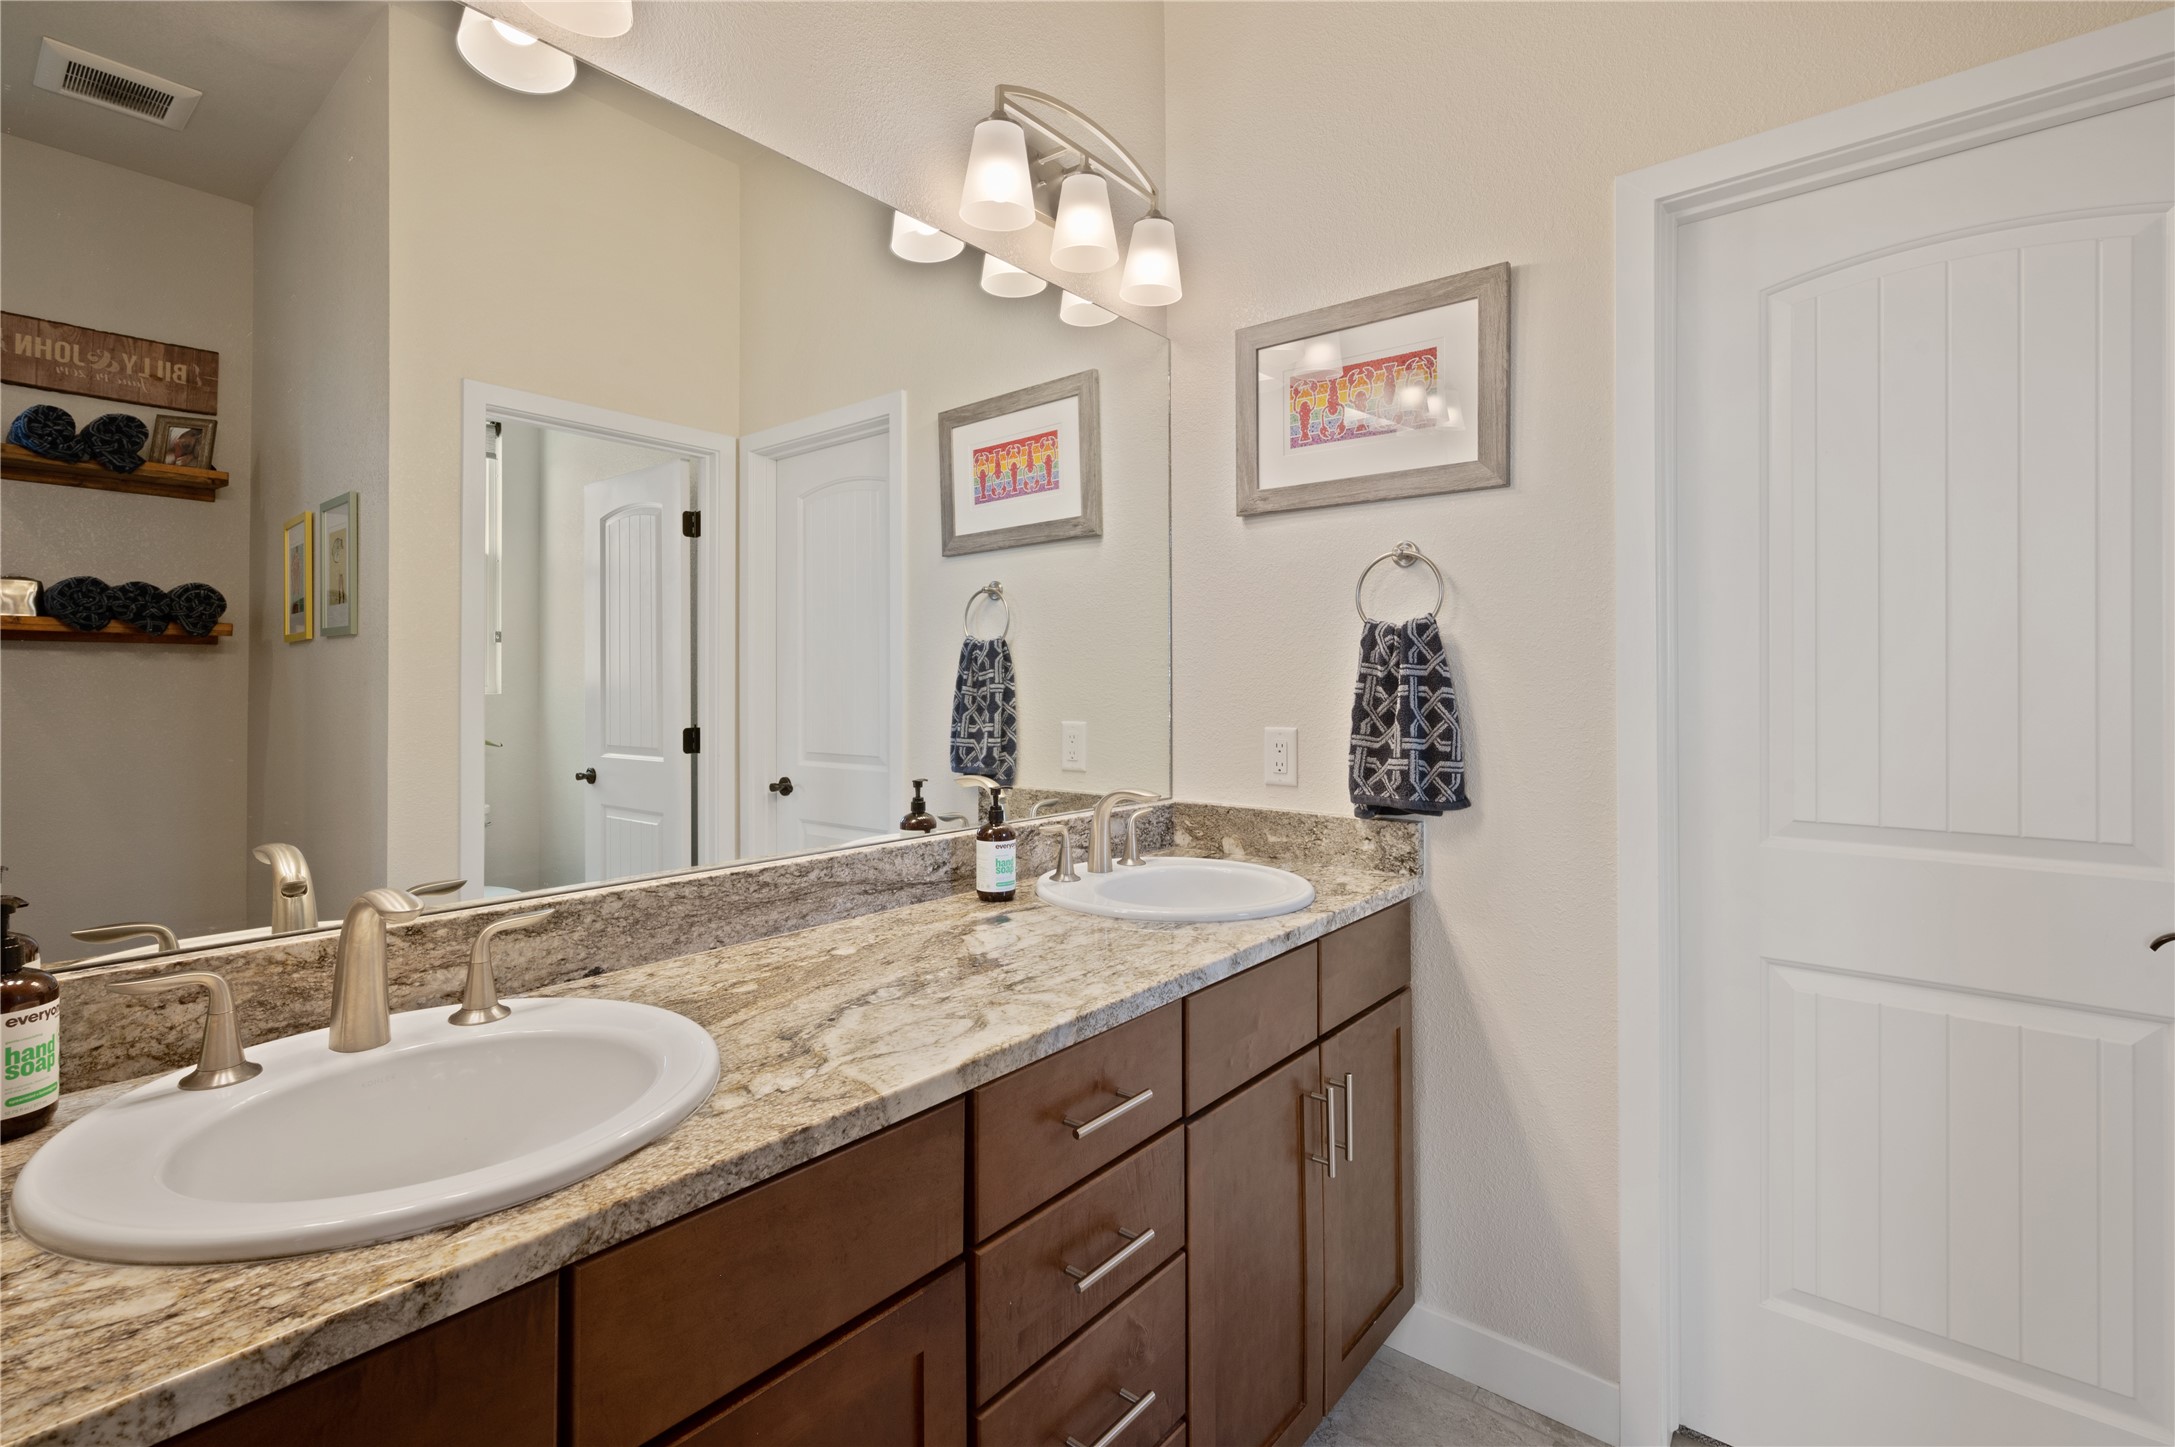 Owner's Bathroom with Double Sinks